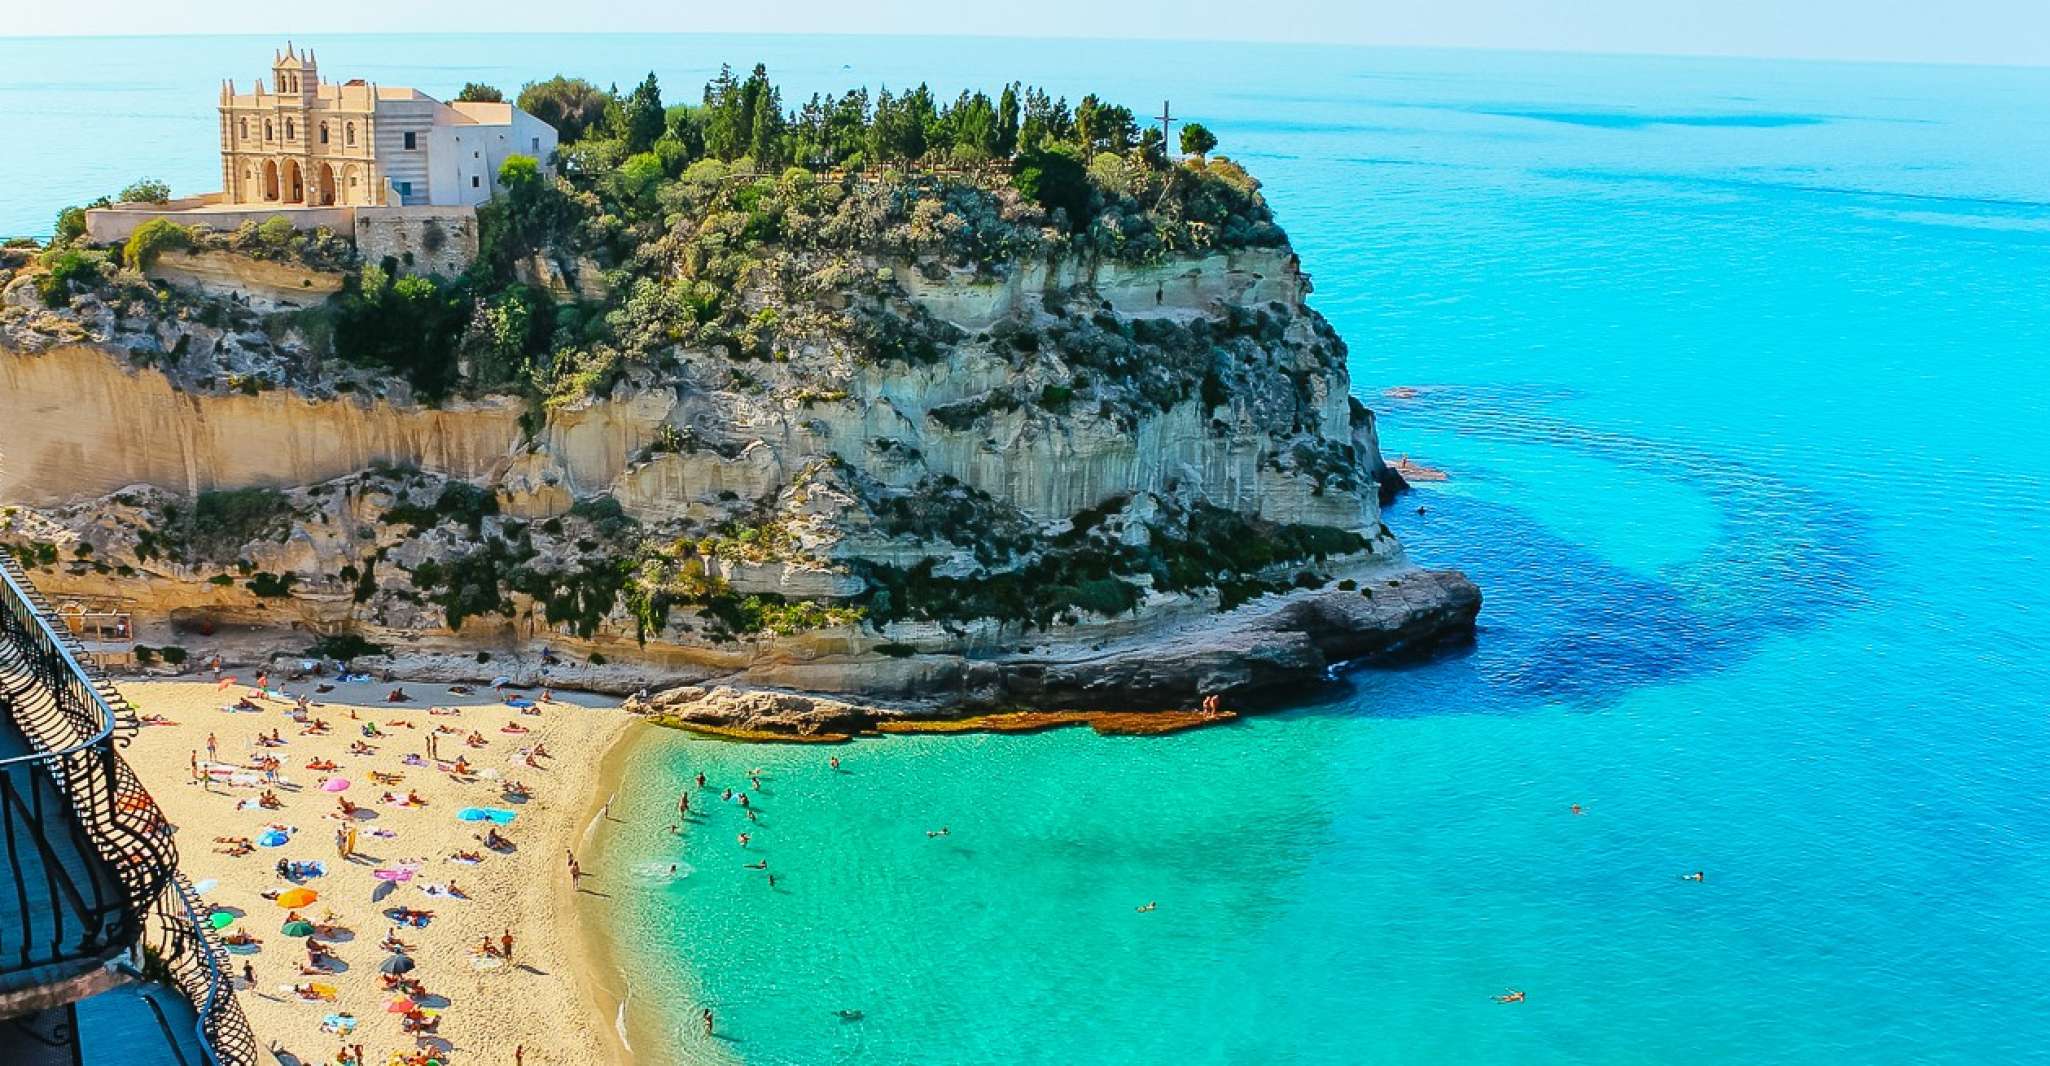 Spicy Calabria, Guided Half-Day Tour to Tropea/Capo Vaticano - Housity